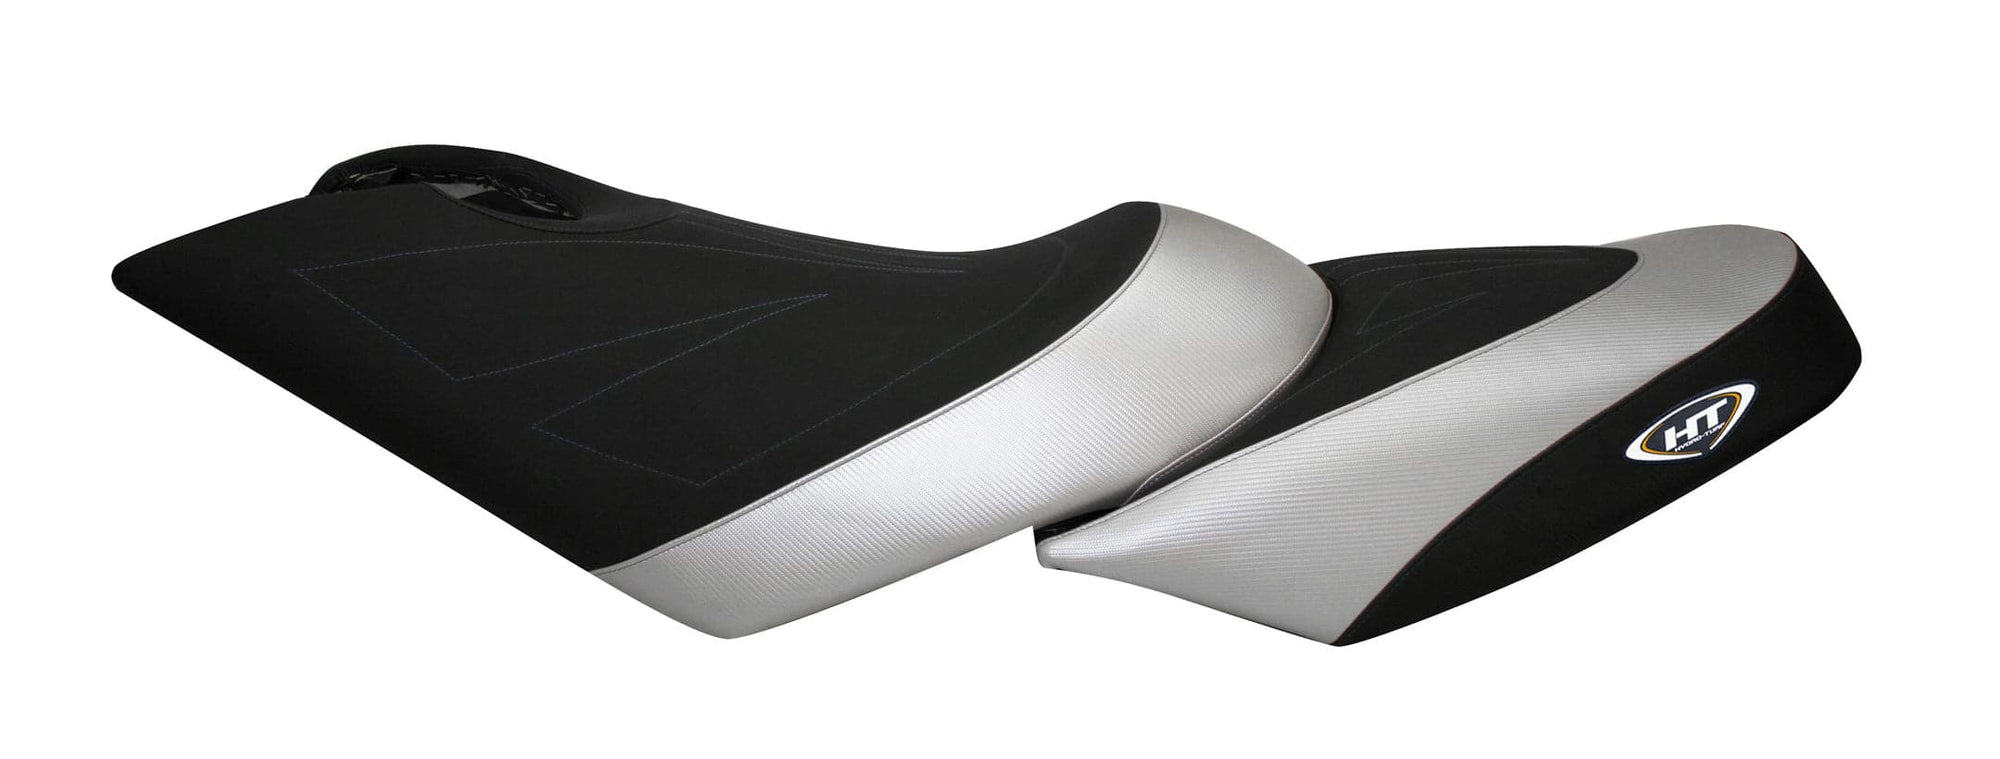 Hydro-Turf Premier Seat Cover for Sea Doo GTX (07-09) / GTX Limited (08) (not iS) Colorway B